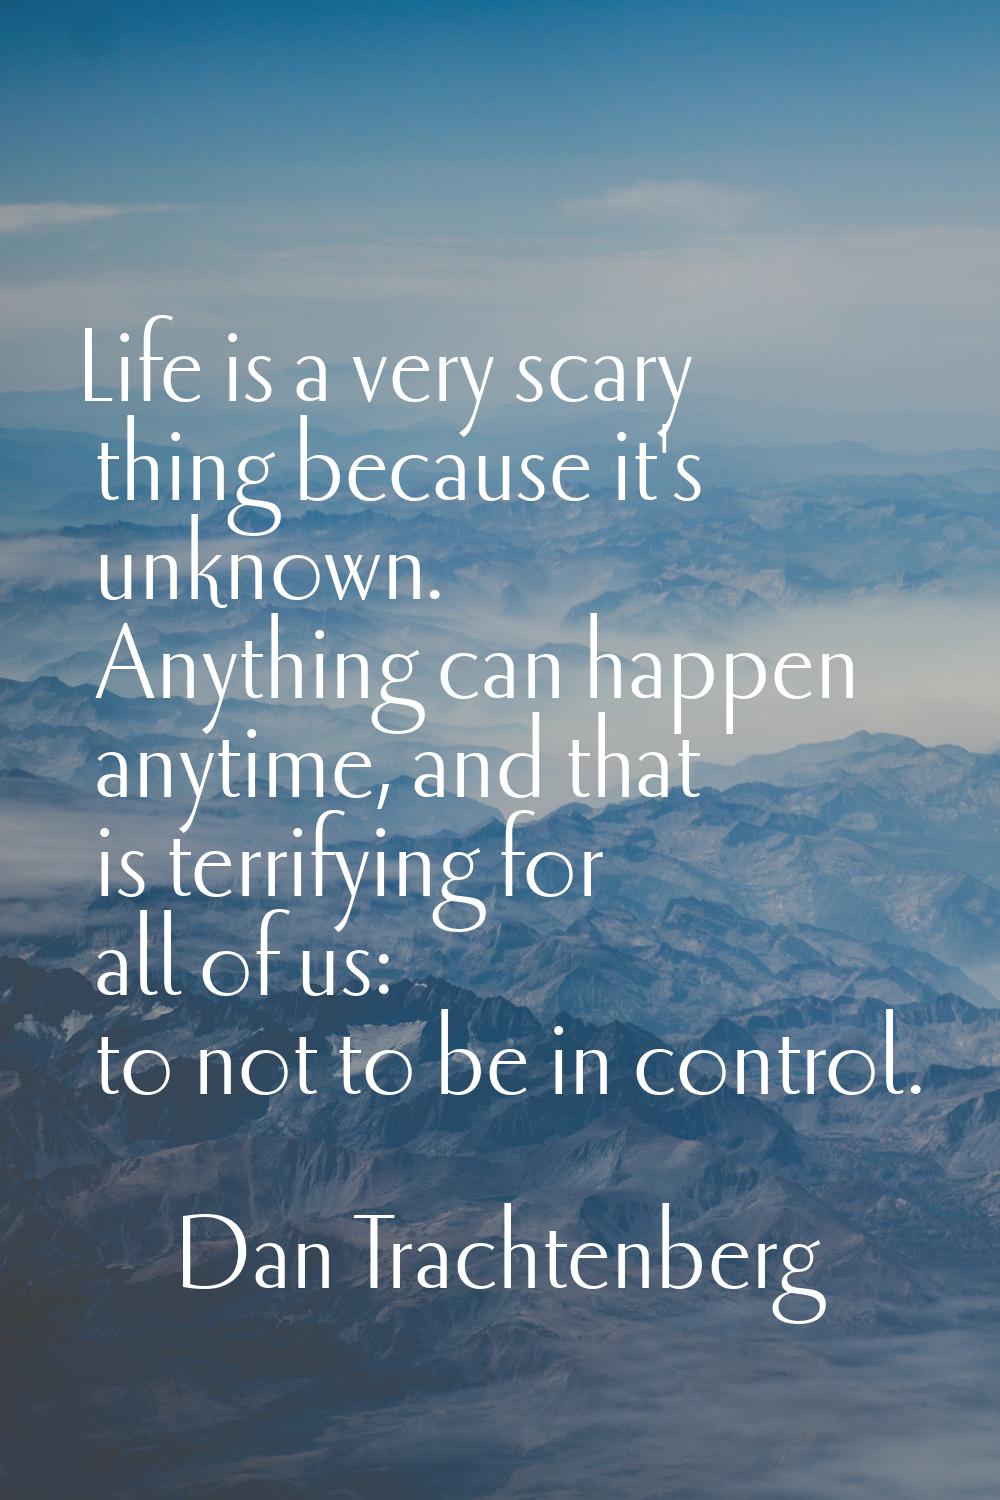 Life is a very scary thing because it's unknown. Anything can happen anytime, and that is terrifyin